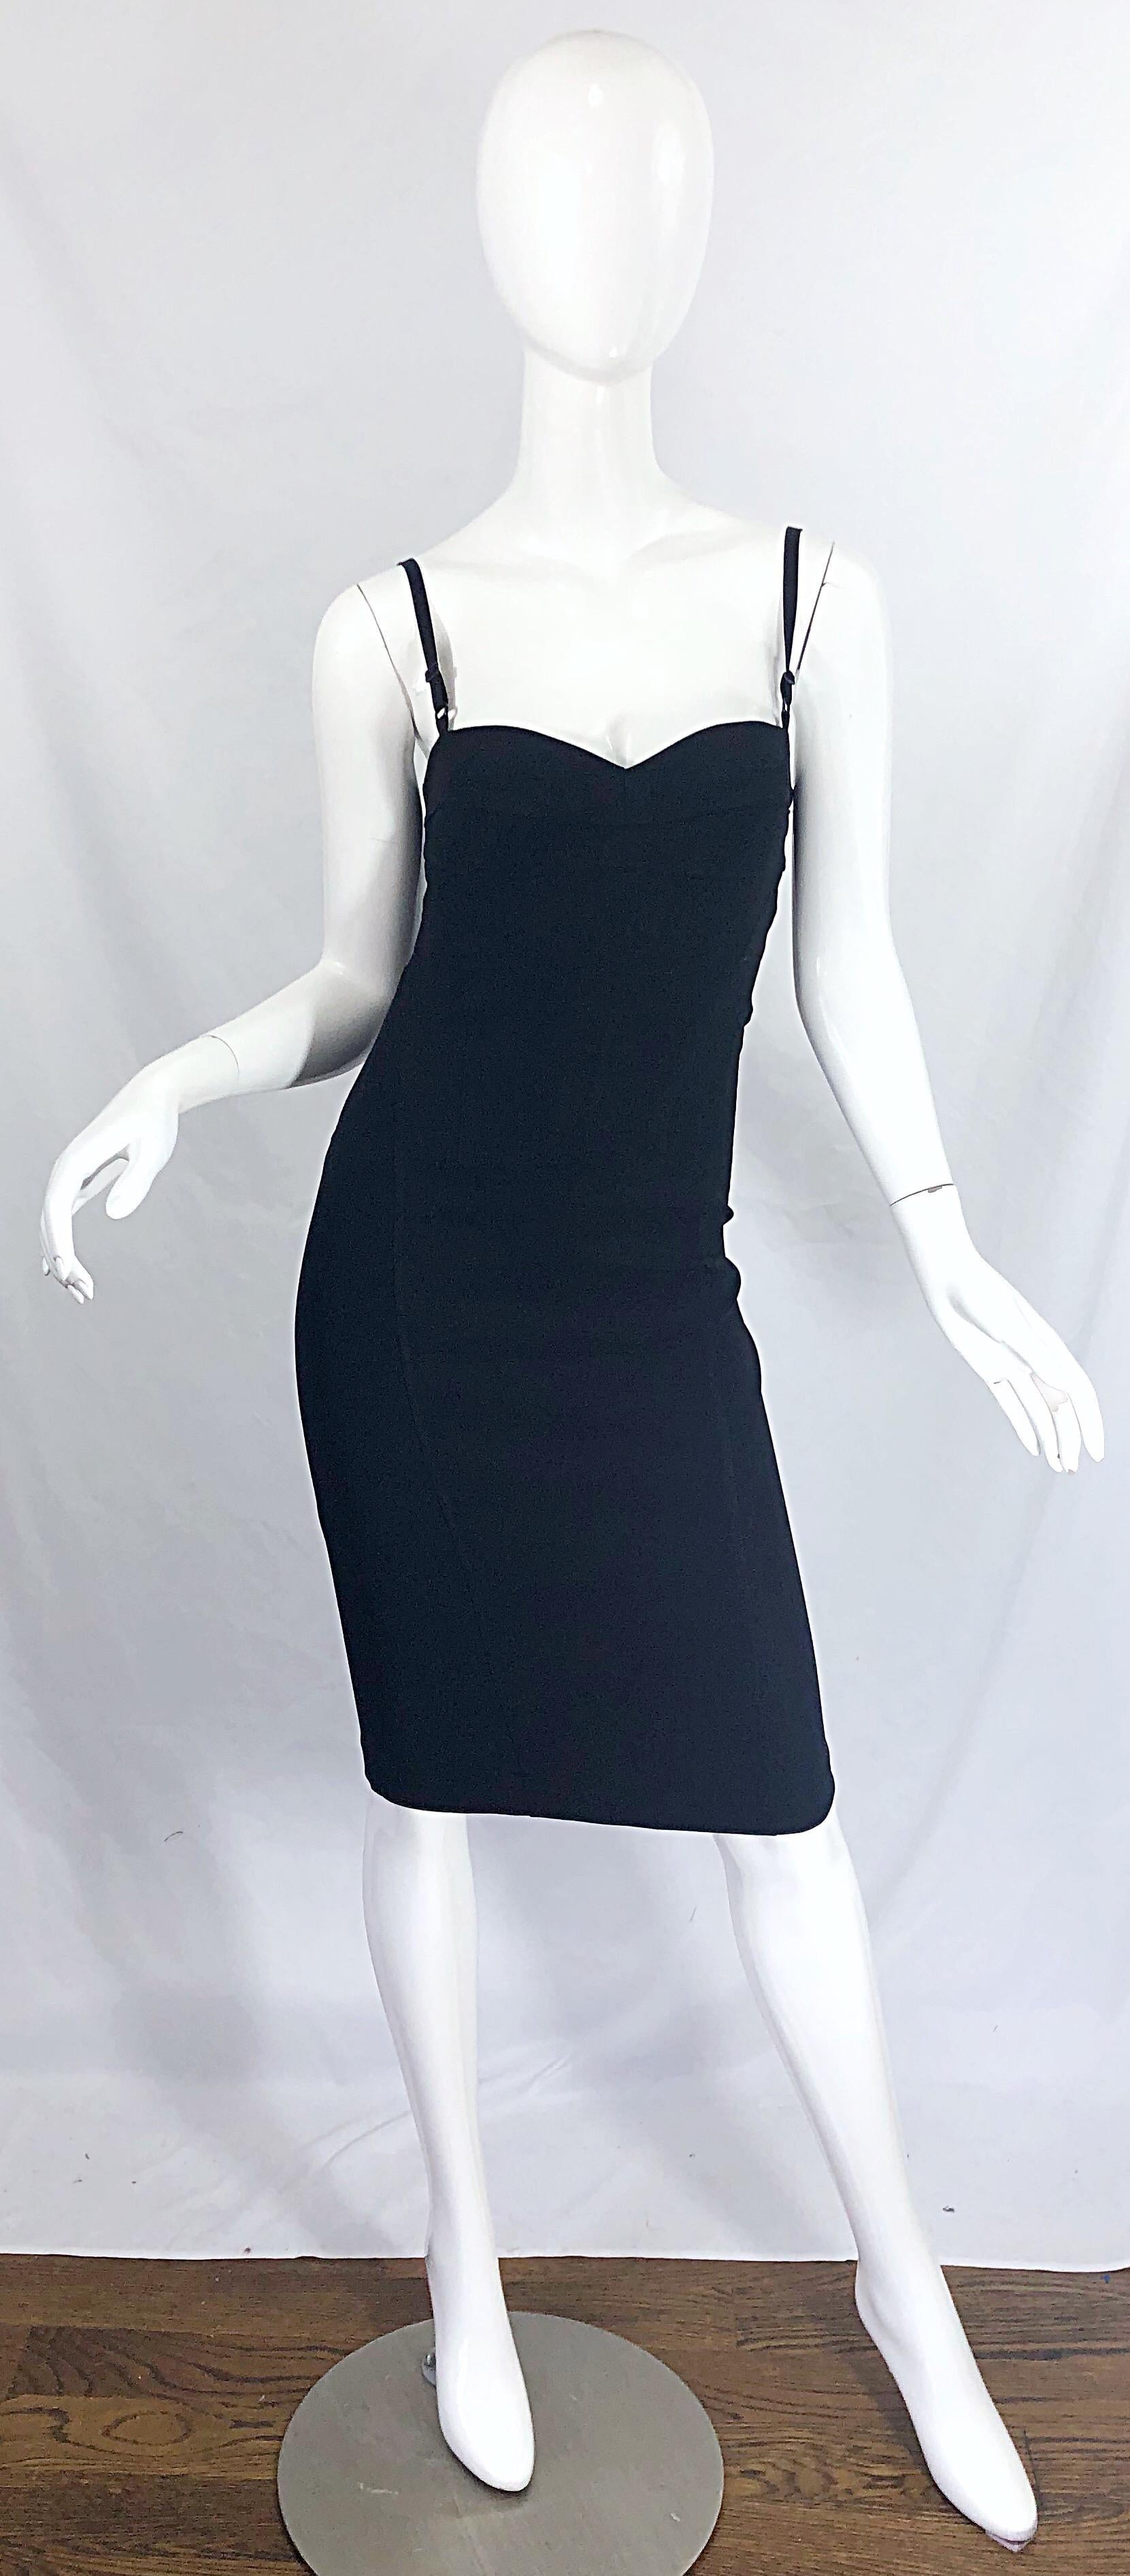 Sexy and iconic late 90s DOLCE & GABBAN black bodycon corset dress ! A classic little black dress that is a timeless addition to any wardrobe. Corset style bodice with adjustable straps. Hidden zipper up the back with hook-and-eye closure. Very